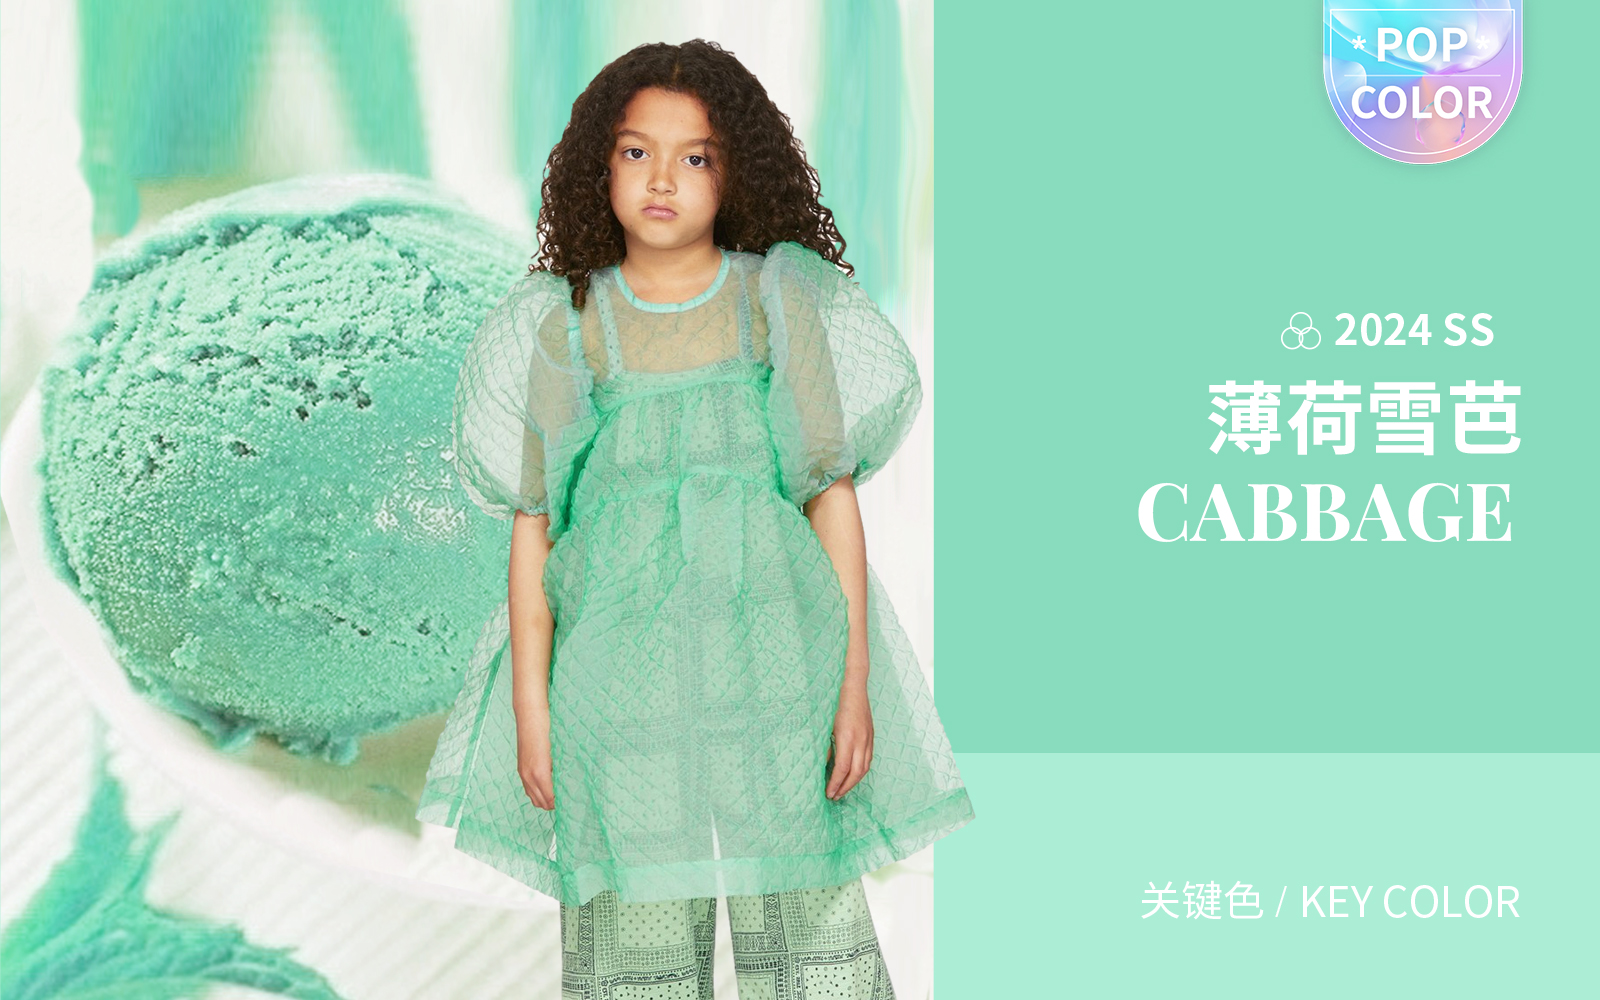 Cabbage -- The Color Trend for Kidswear